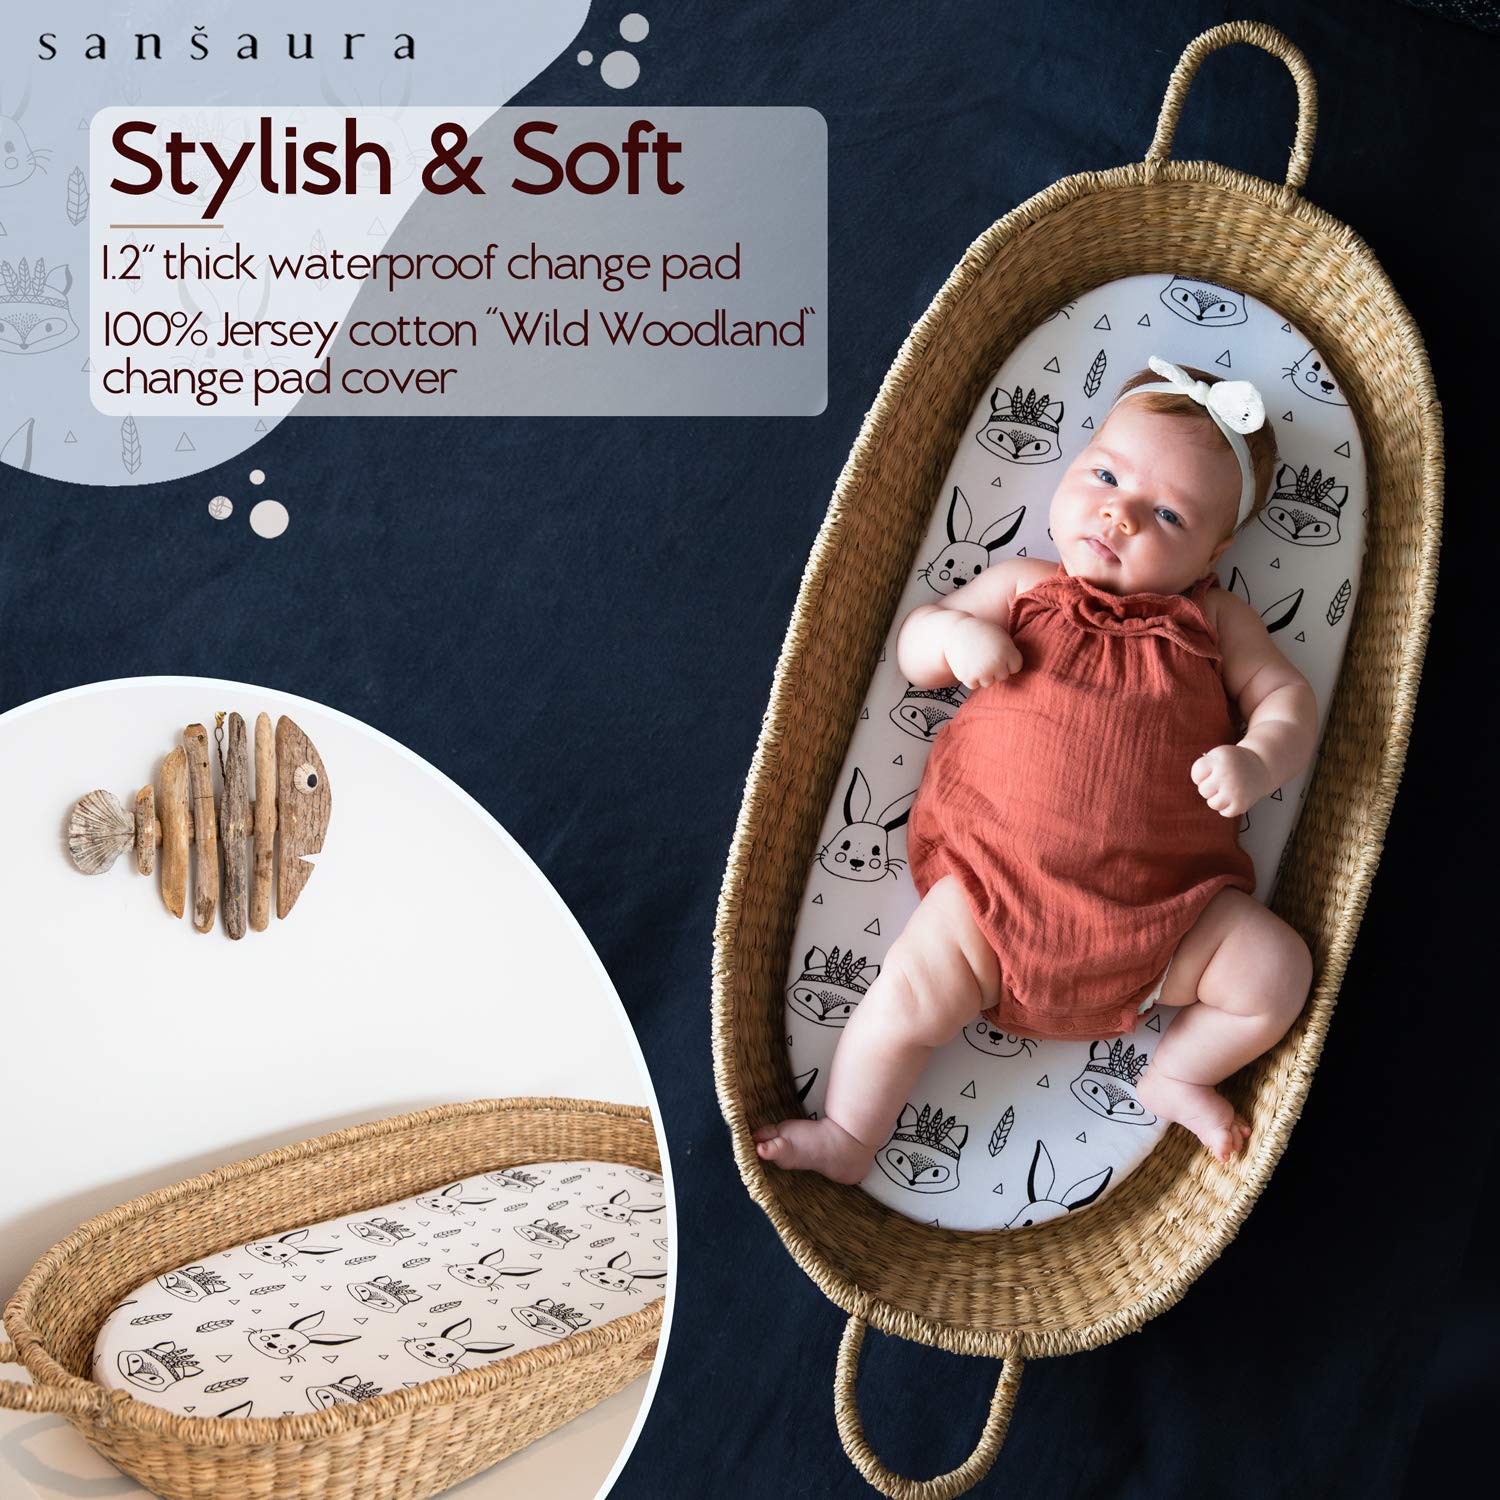 Sansaura Nursery Set - Seagrass Baby Changing Basket, Diaper Basket, with Thick Waterproof Pad & 100% Cotton Fitted Sheet, Toy Storage Bag, Woodland Designs, Shower Gift for Newborns, Boho Nursery